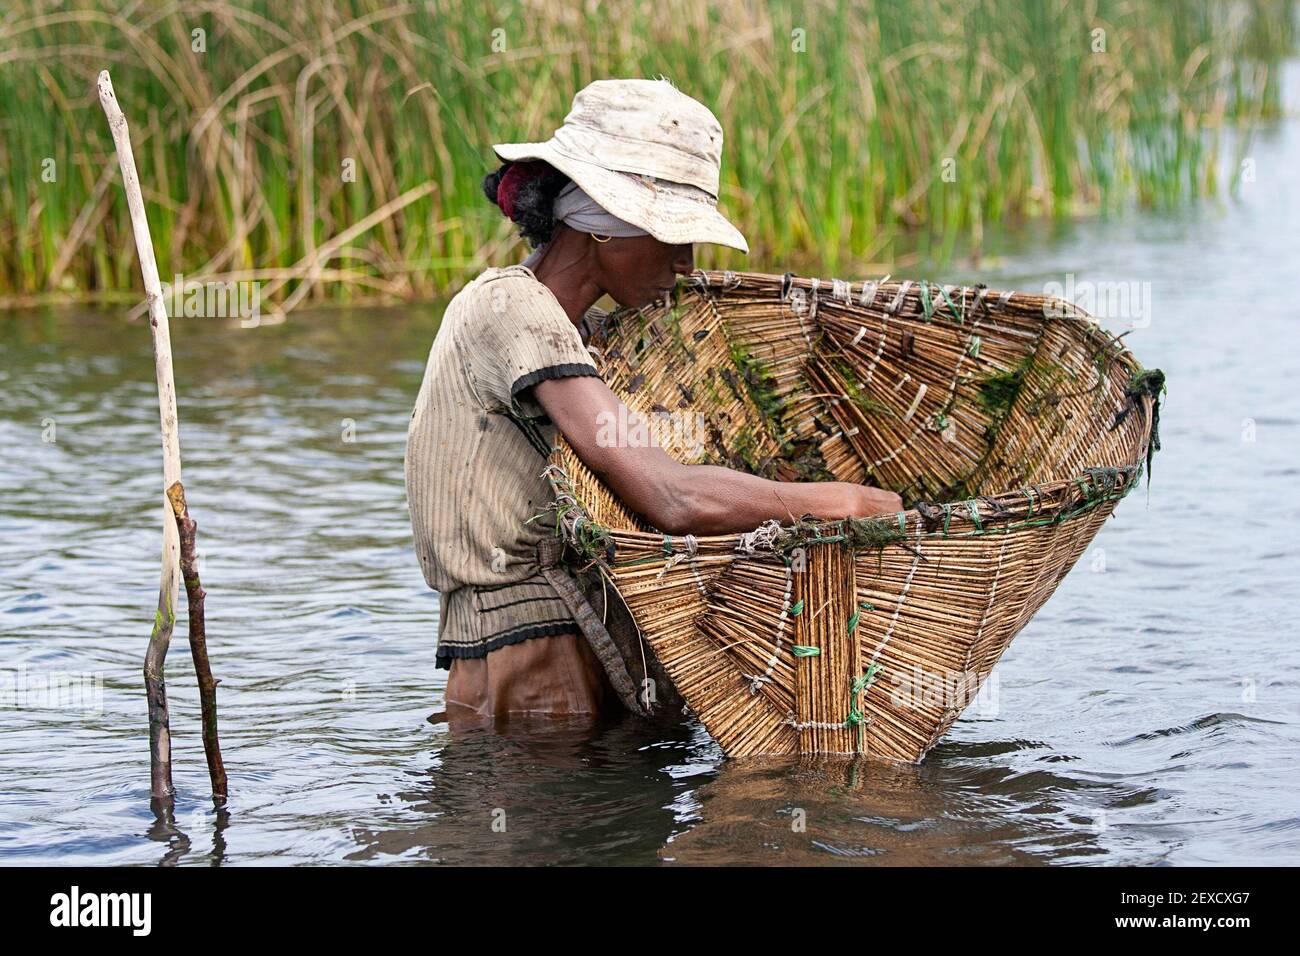 Woman fishing with a traditional woven basket, wooden fishing equipment,  Maroansetra, Madagascar Stock Photo - Alamy